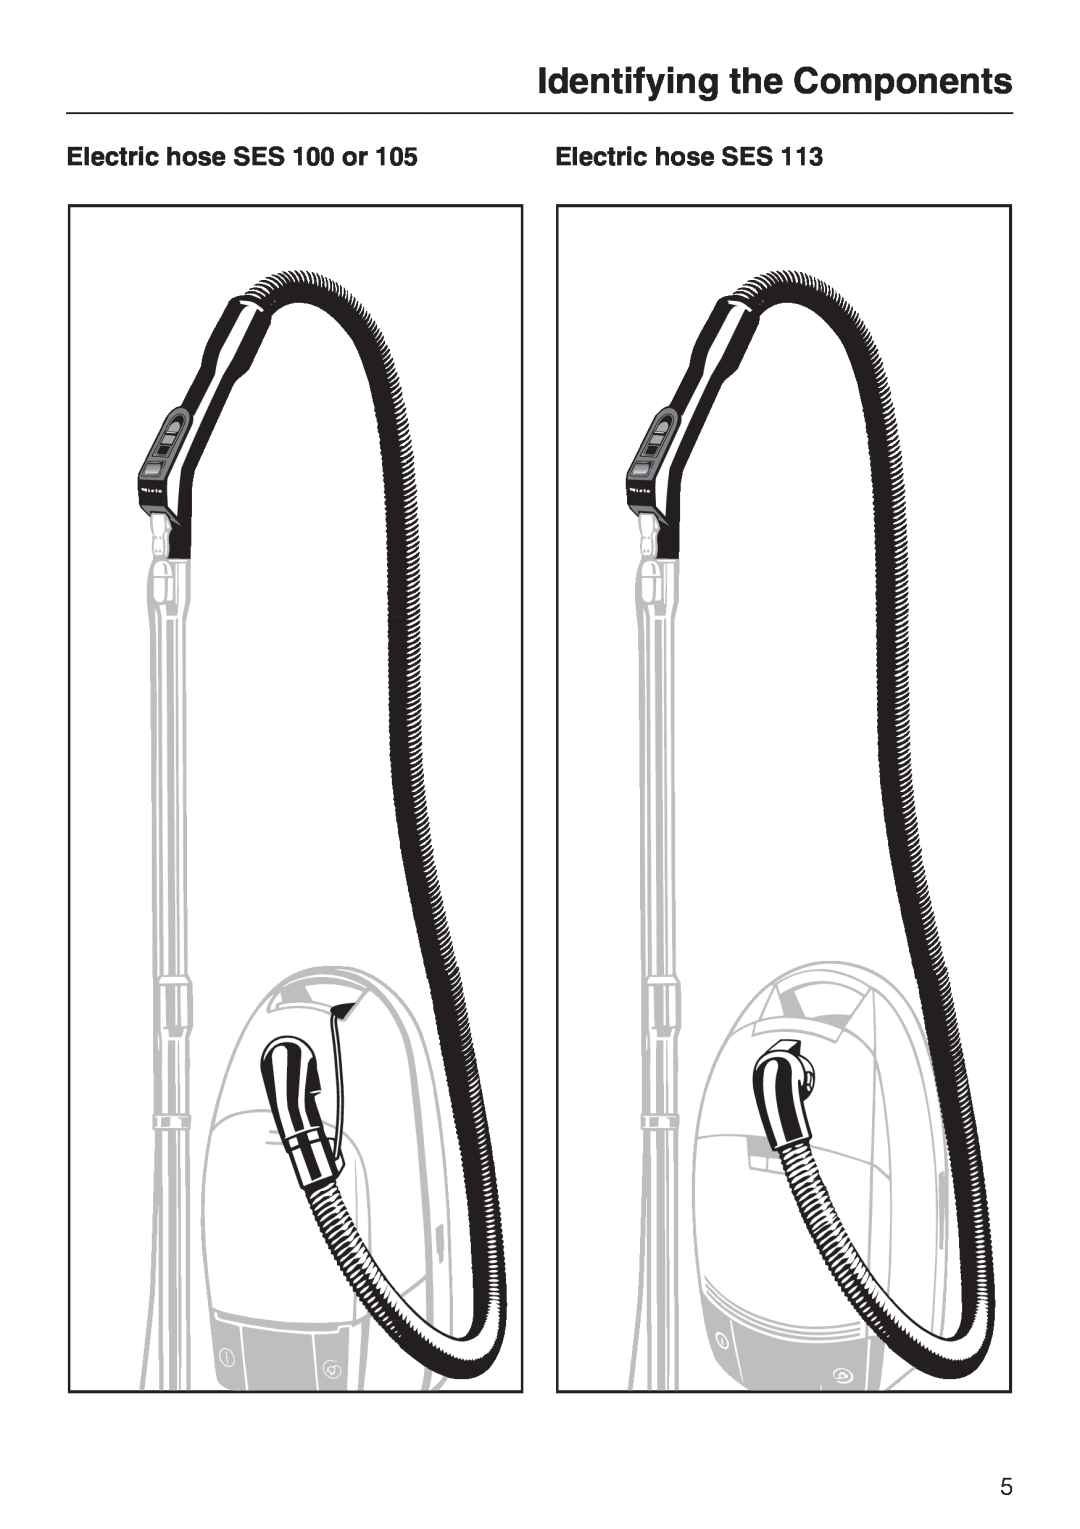 Miele 217-2, 217-3, 213-2 operating instructions Identifying the Components, Electric hose SES 100 or 